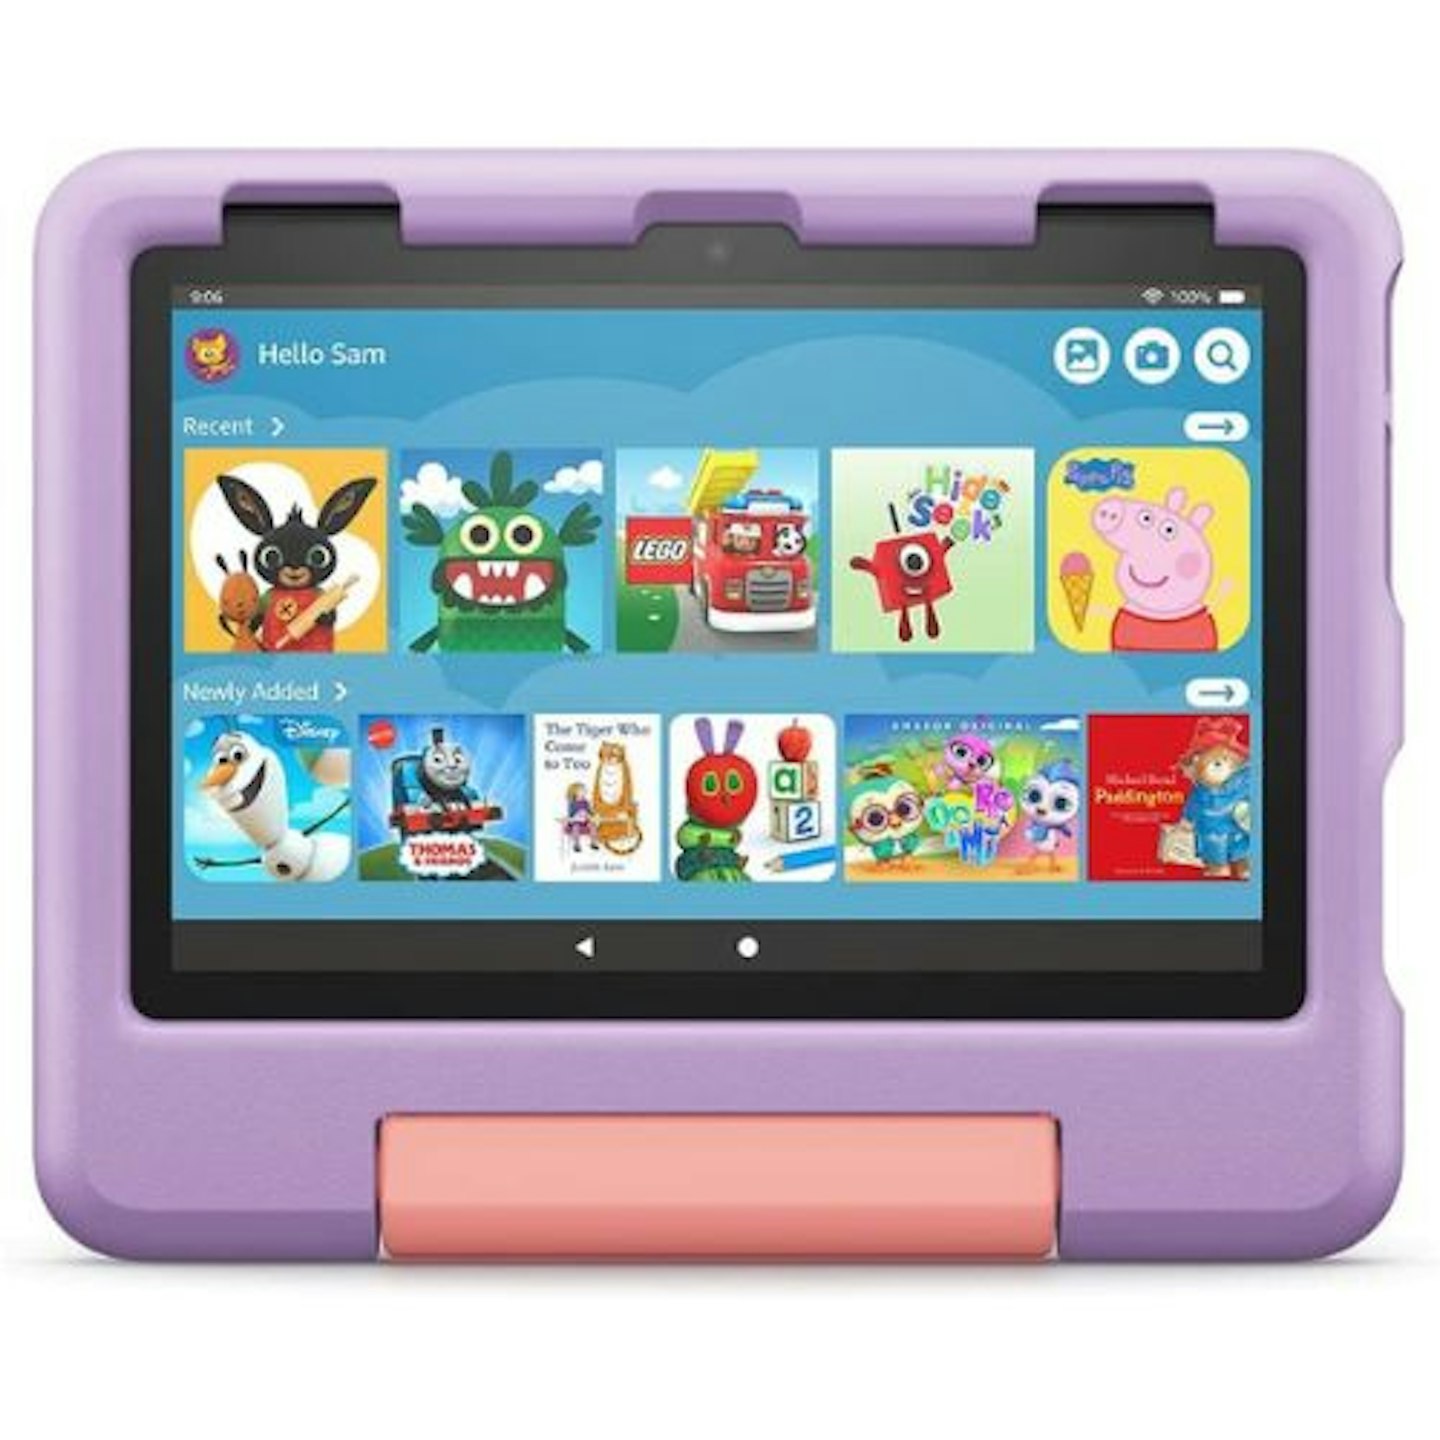 Best toys for 5 year olds All-new Fire HD 8 Kids tablet